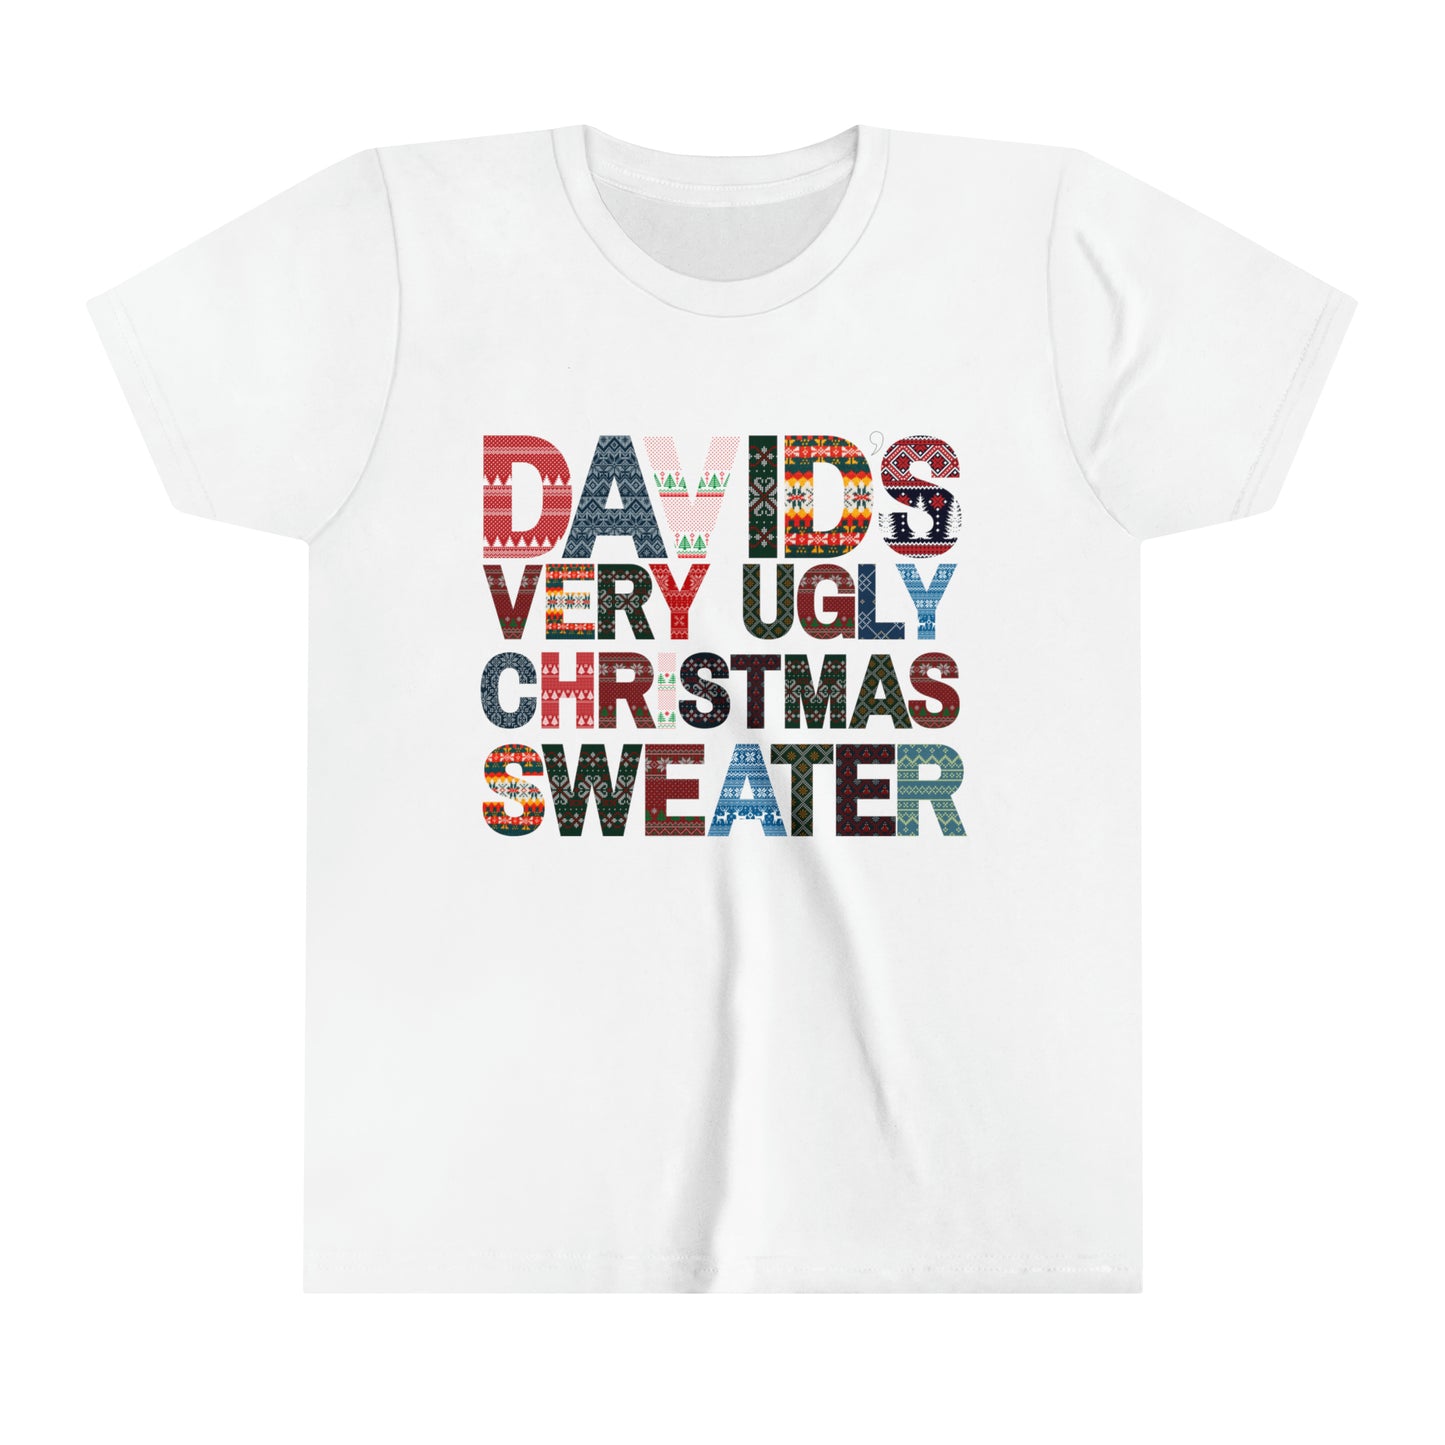 Very Ugly Christmas Sweater Personalized Youth T-Shirt